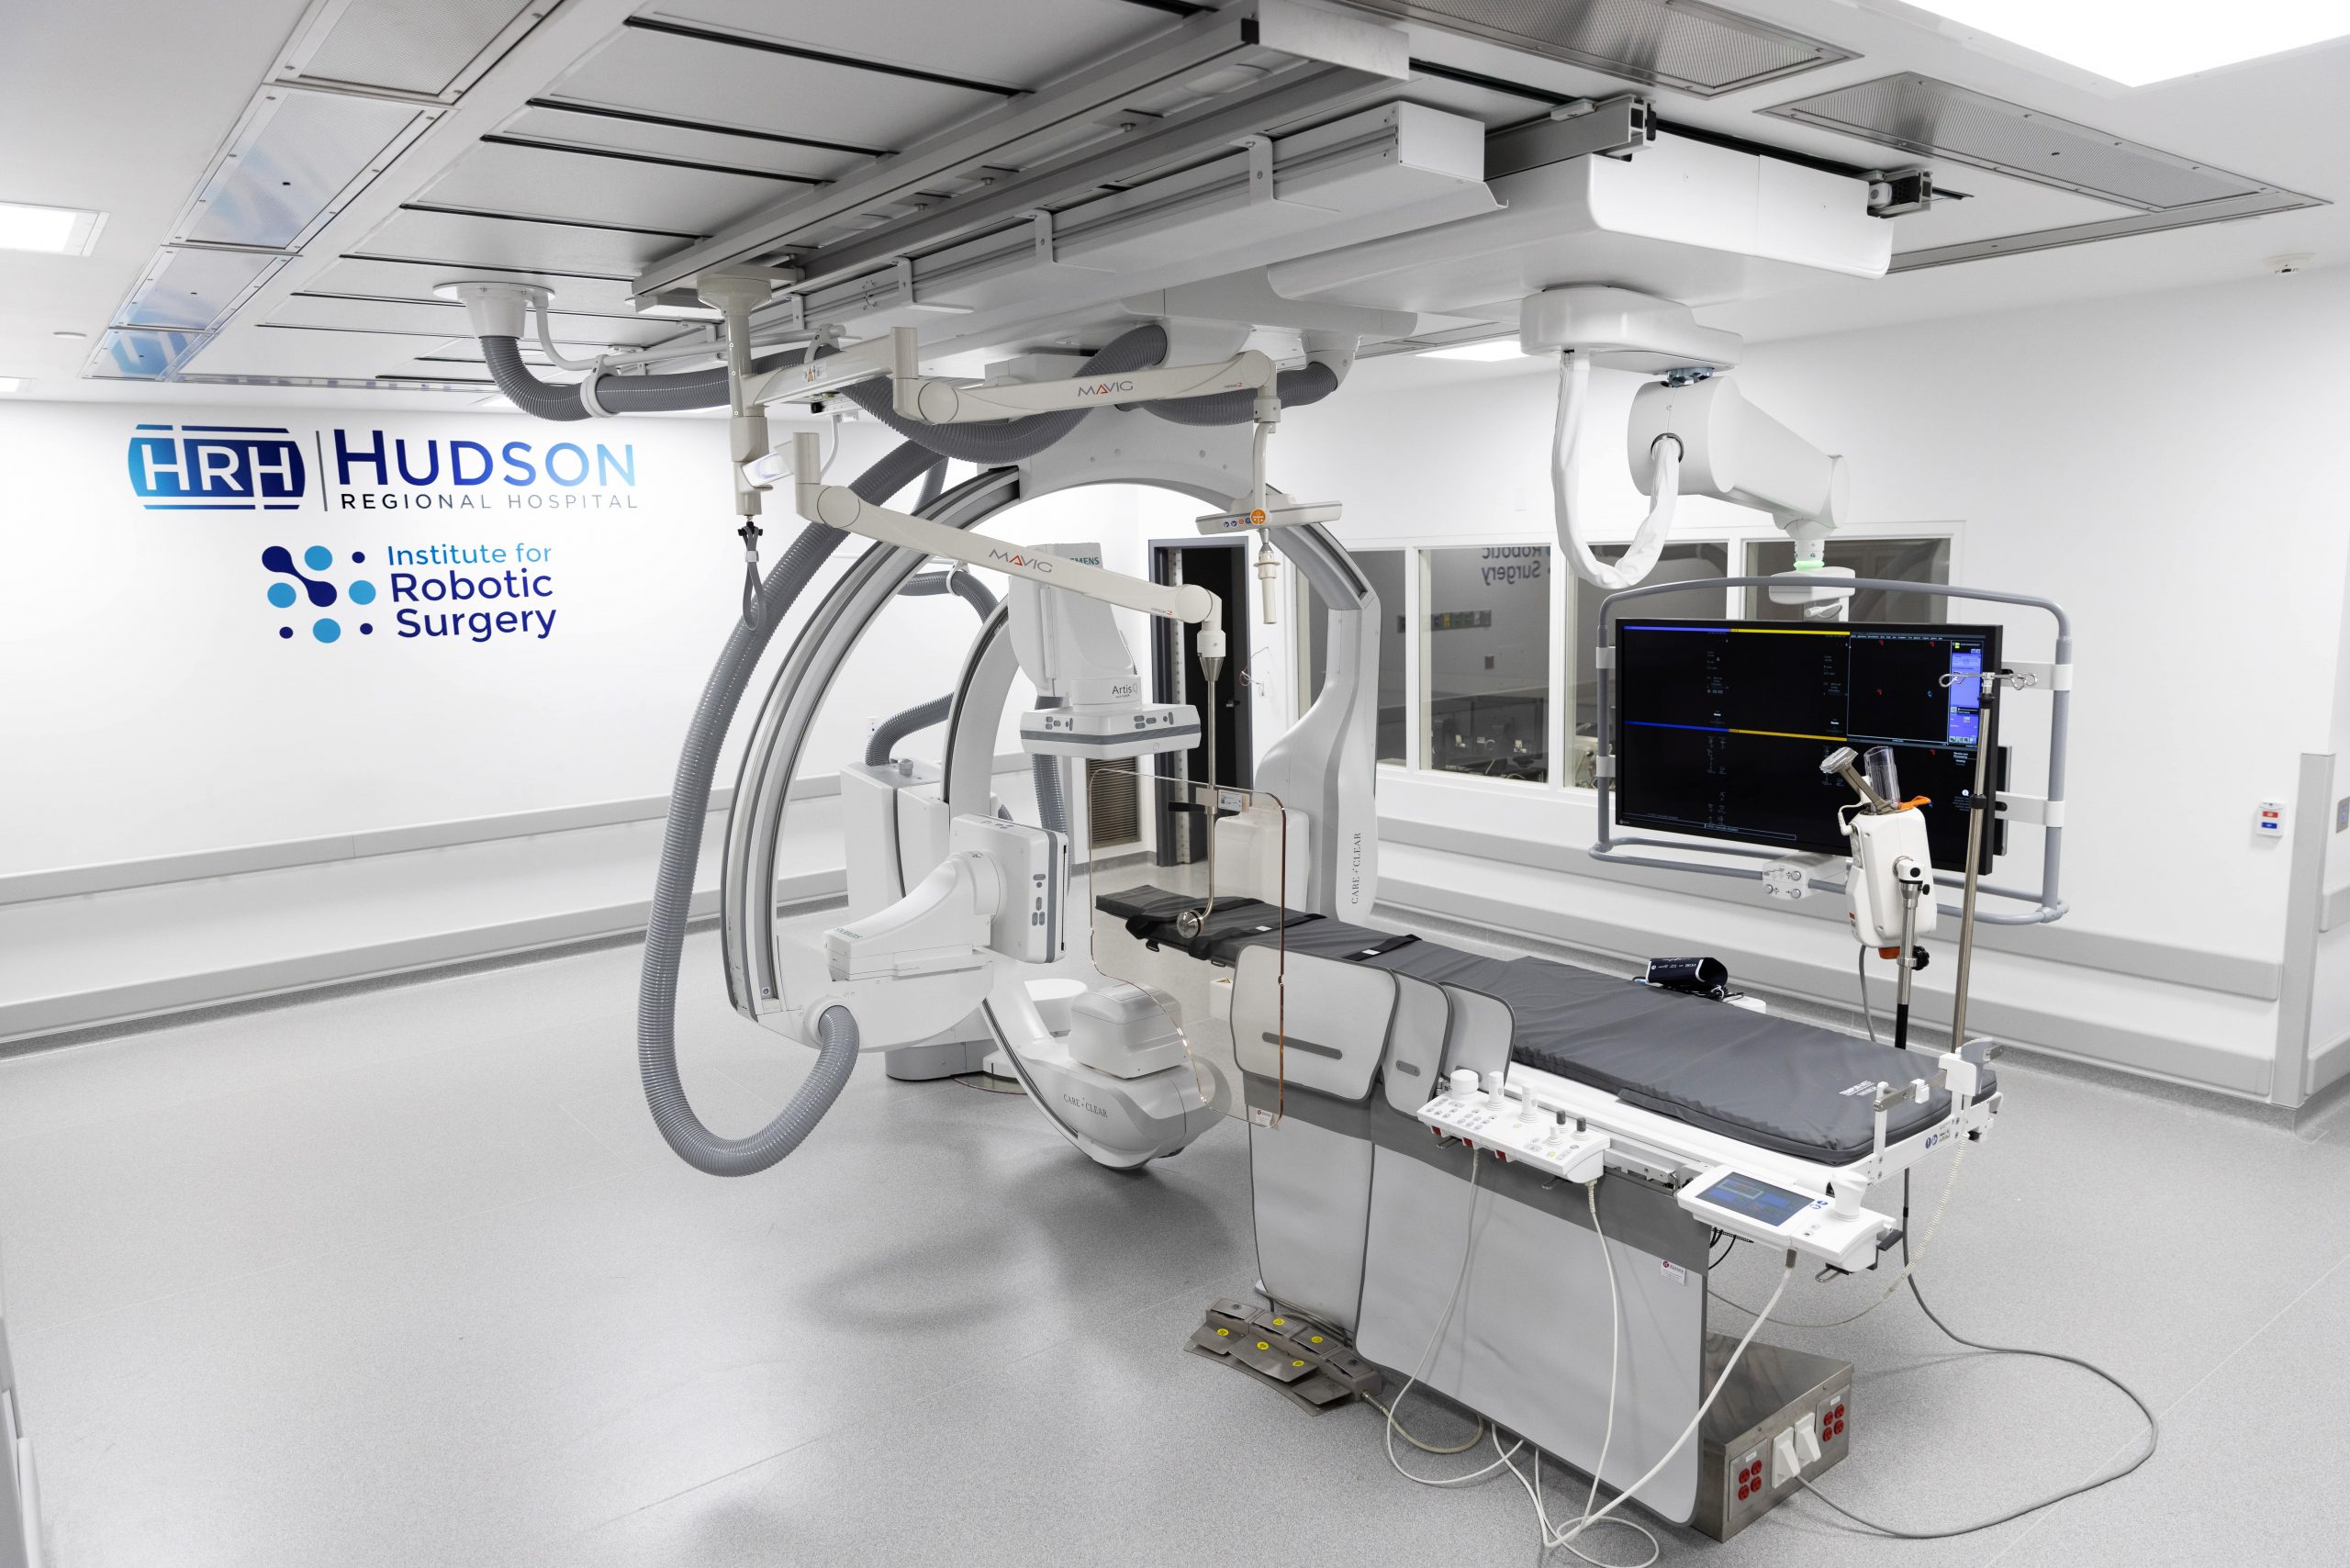 Hudson Regional Hospital's cath lab is a state-of-the-art facility equipped with advanced technology and staffed by highly trained professionals who specialize in diagnostic and interventional cardiac procedures.